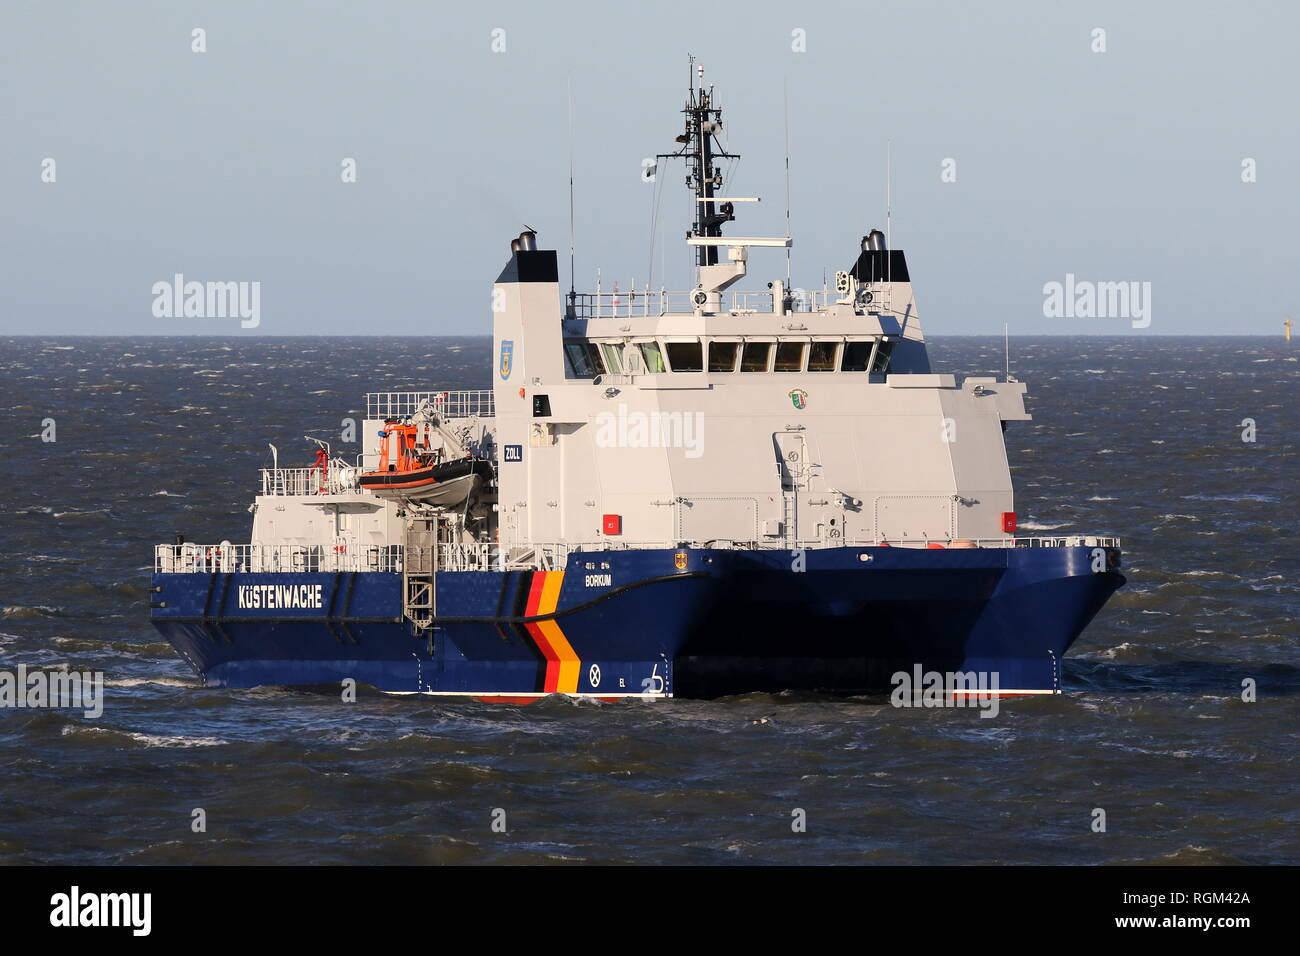 The ship of the Coast Guard Borkum happened on January 2, 2019 Cuxhaven on the Elbe. Stock Photo